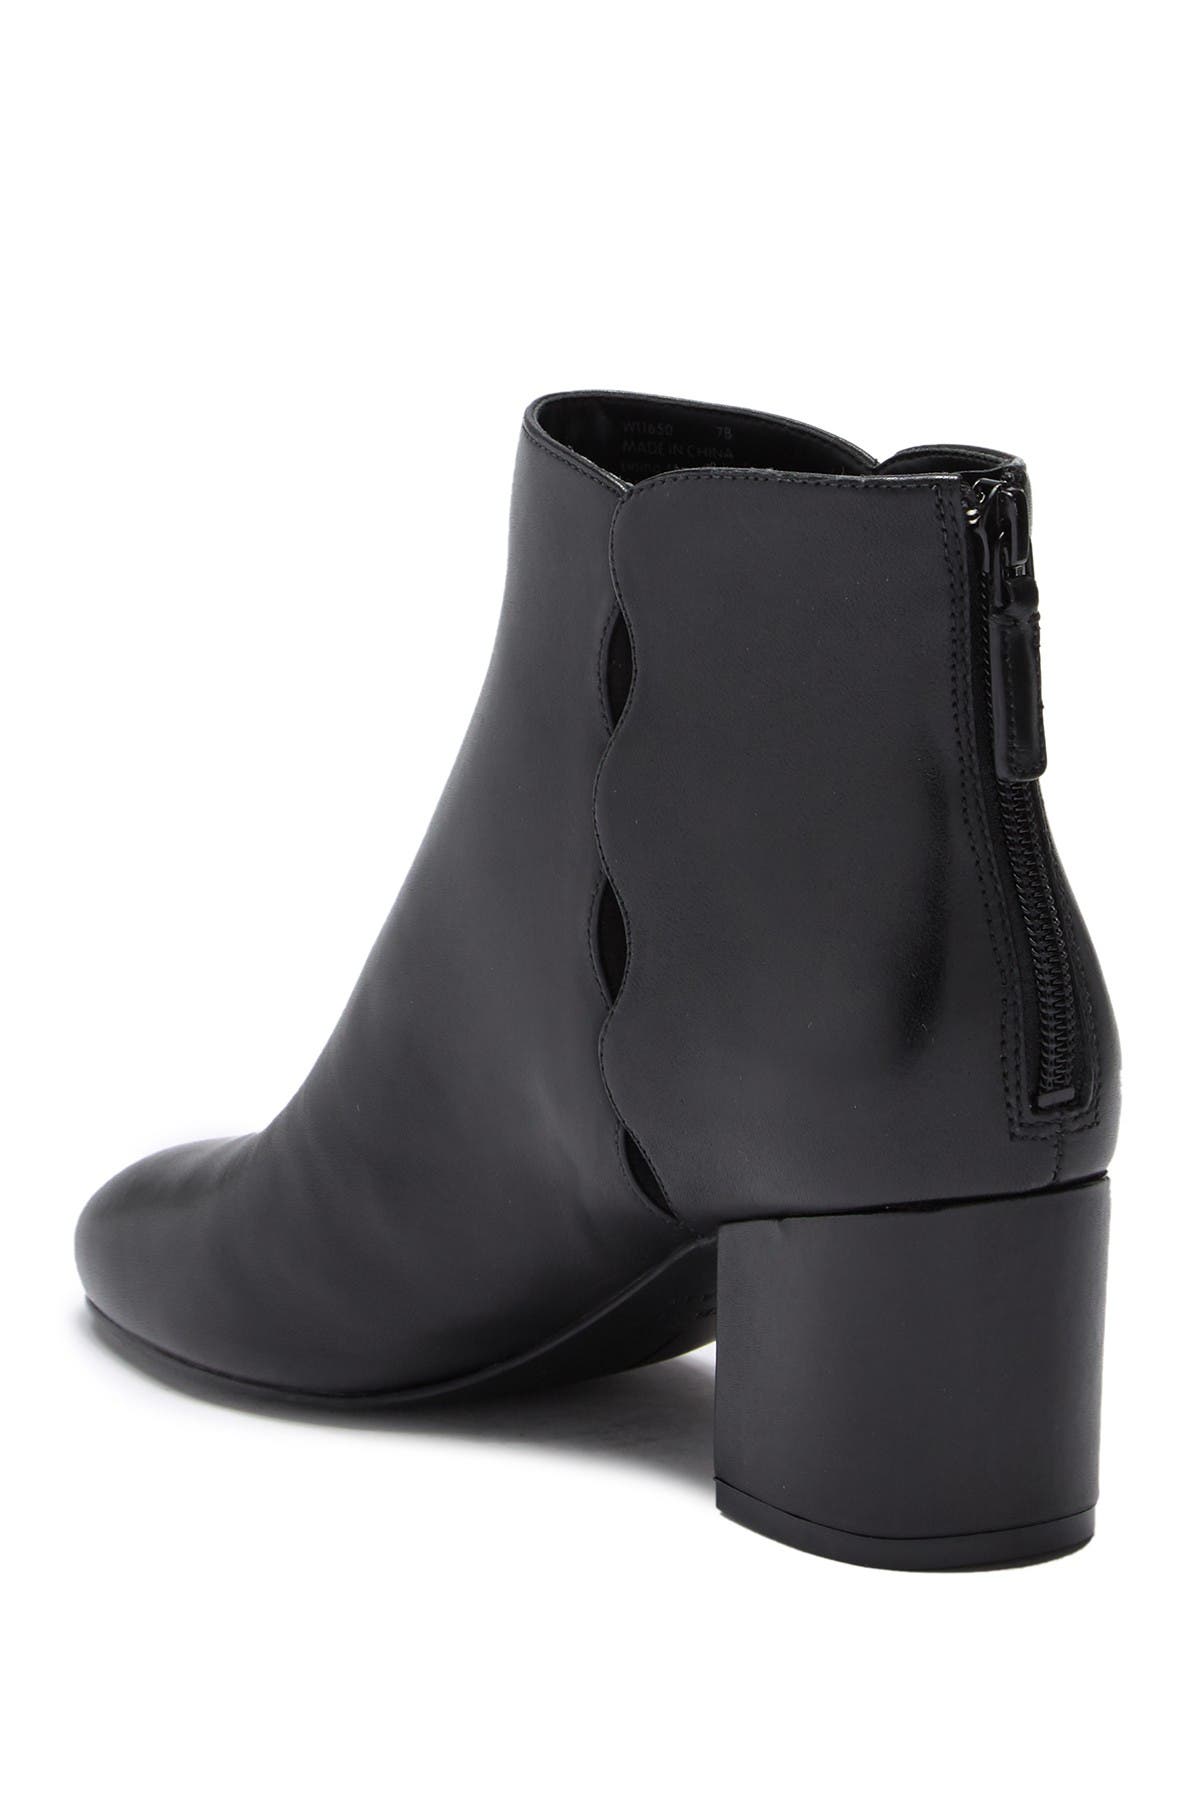 indra grand bootie